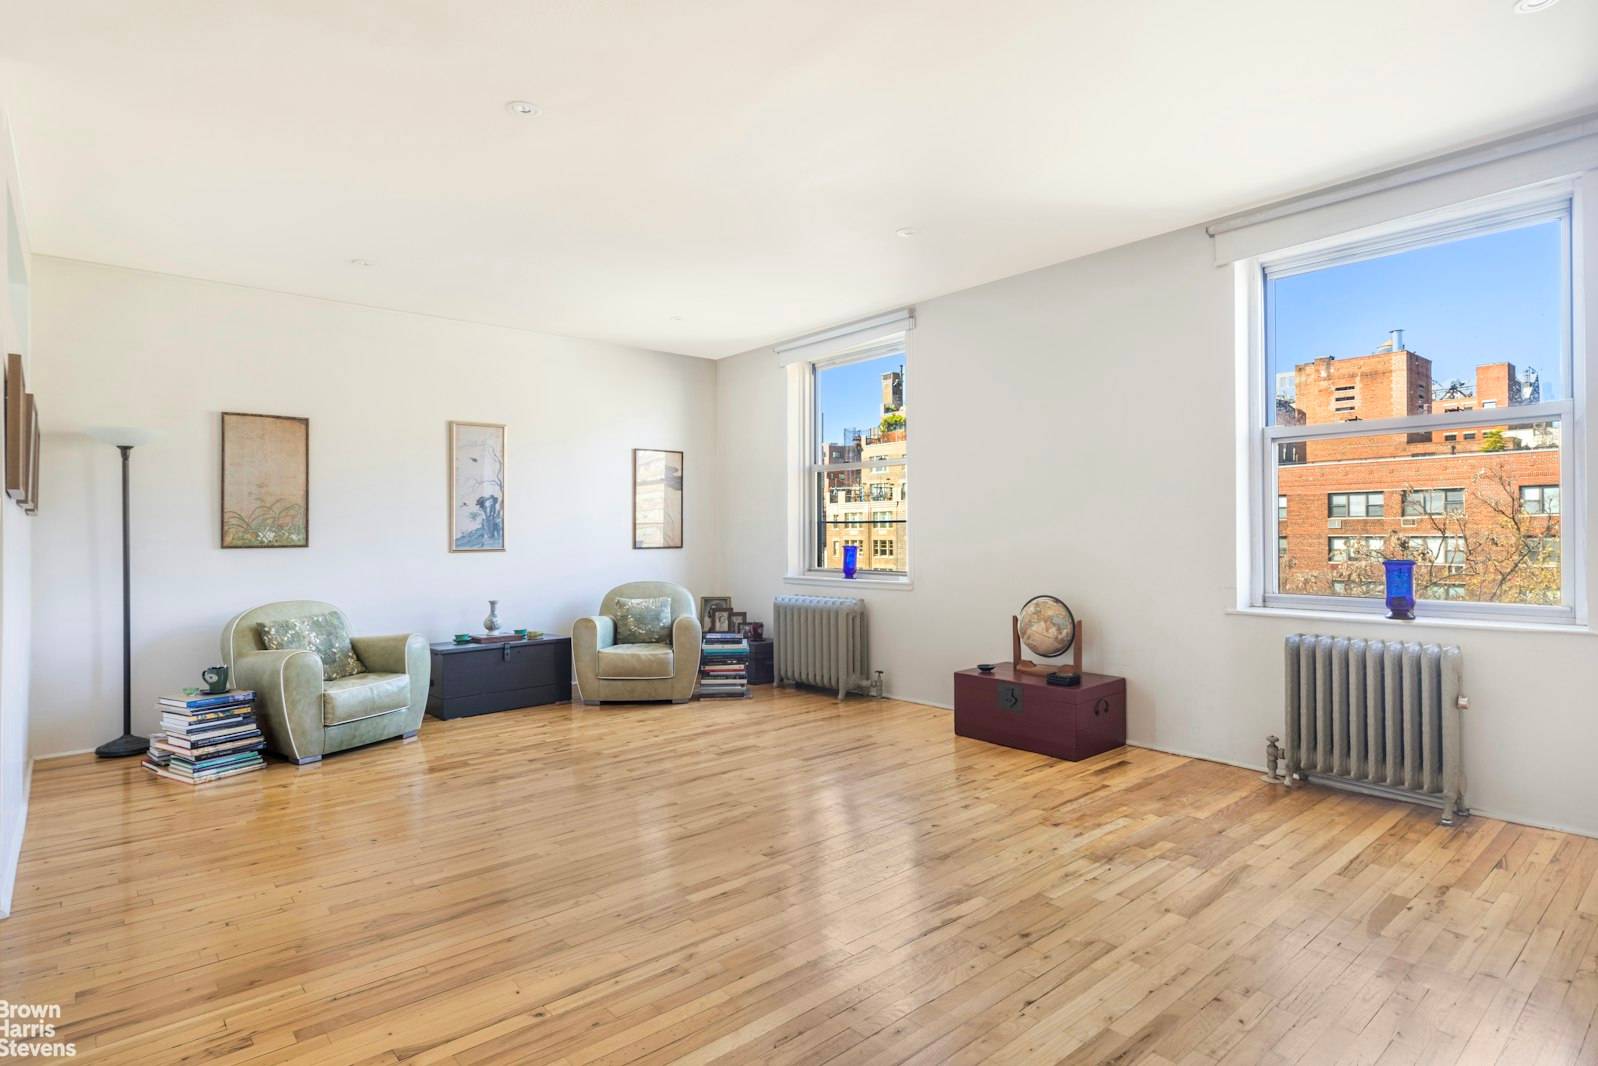 Welcome to this charming once 2 bedroom now one bedroom home in the most coveted block in the Village 11th street between 5th and 6th Avenues.